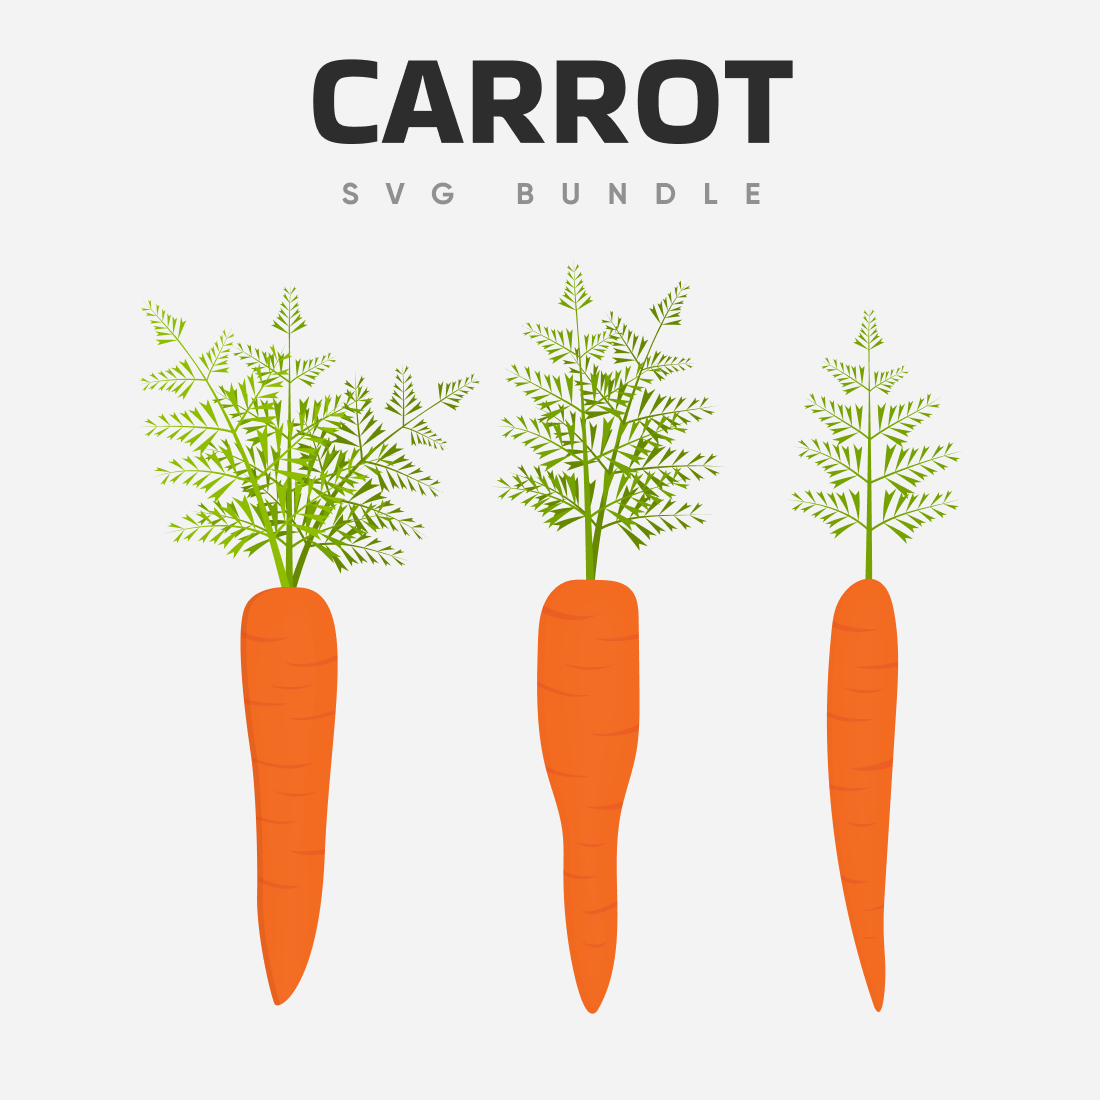 Three drawings of carrots with a caption.